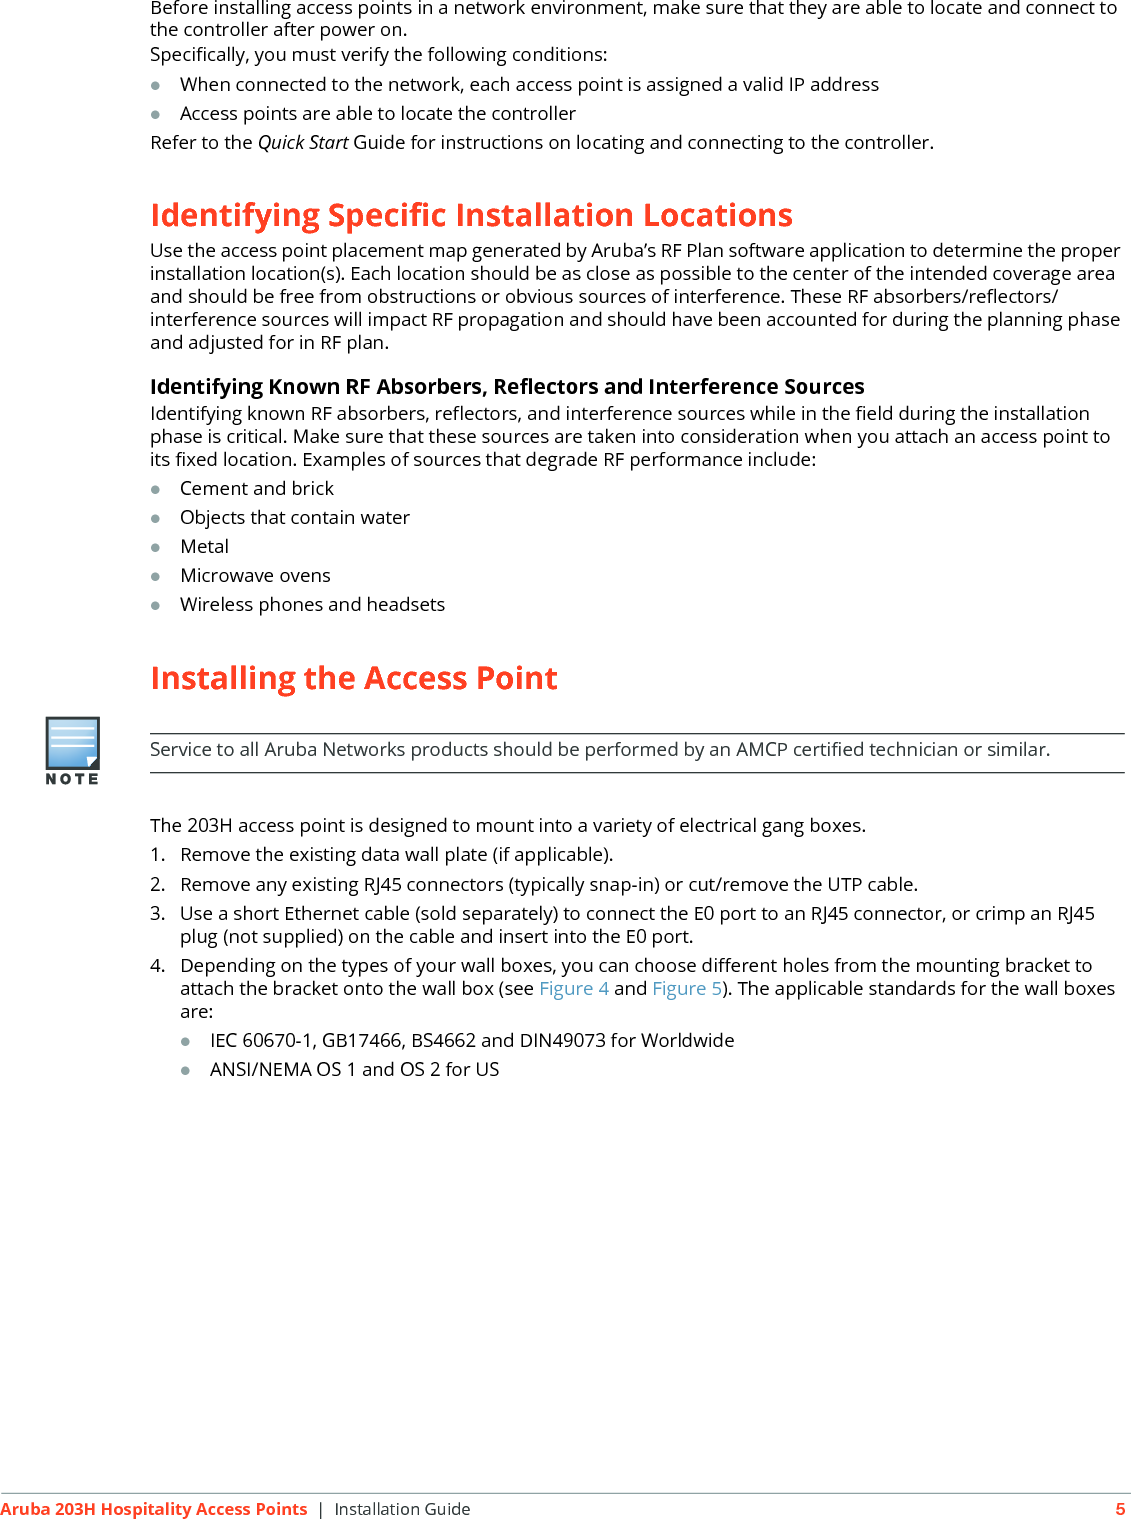 Aruba 203H Hospitality Access Points | Installation Guide 5Before installing access points in a network environment, make sure that they are able to locate and connect to the controller after power on.Specifically, you must verify the following conditions:When connected to the network, each access point is assigned a valid IP addressAccess points are able to locate the controller Refer to the Quick Start Guide for instructions on locating and connecting to the controller.Identifying Specific Installation LocationsUse the access point placement map generated by Aruba’s RF Plan software application to determine the proper installation location(s). Each location should be as close as possible to the center of the intended coverage area and should be free from obstructions or obvious sources of interference. These RF absorbers/reflectors/interference sources will impact RF propagation and should have been accounted for during the planning phase and adjusted for in RF plan.Identifying Known RF Absorbers, Reflectors and Interference SourcesIdentifying known RF absorbers, reflectors, and interference sources while in the field during the installation phase is critical. Make sure that these sources are taken into consideration when you attach an access point to its fixed location. Examples of sources that degrade RF performance include:Cement and brickObjects that contain waterMetalMicrowave ovensWireless phones and headsetsInstalling the Access PointThe 203H access point is designed to mount into a variety of electrical gang boxes.1. Remove the existing data wall plate (if applicable).2. Remove any existing RJ45 connectors (typically snap-in) or cut/remove the UTP cable.3. Use a short Ethernet cable (sold separately) to connect the E0 port to an RJ45 connector, or crimp an RJ45 plug (not supplied) on the cable and insert into the E0 port. 4. Depending on the types of your wall boxes, you can choose different holes from the mounting bracket to attach the bracket onto the wall box (see Figure 4 and Figure 5). The applicable standards for the wall boxes are:IEC 60670-1, GB17466, BS4662 and DIN49073 for WorldwideANSI/NEMA OS 1 and OS 2 for USService to all Aruba Networks products should be performed by an AMCP certified technician or similar.